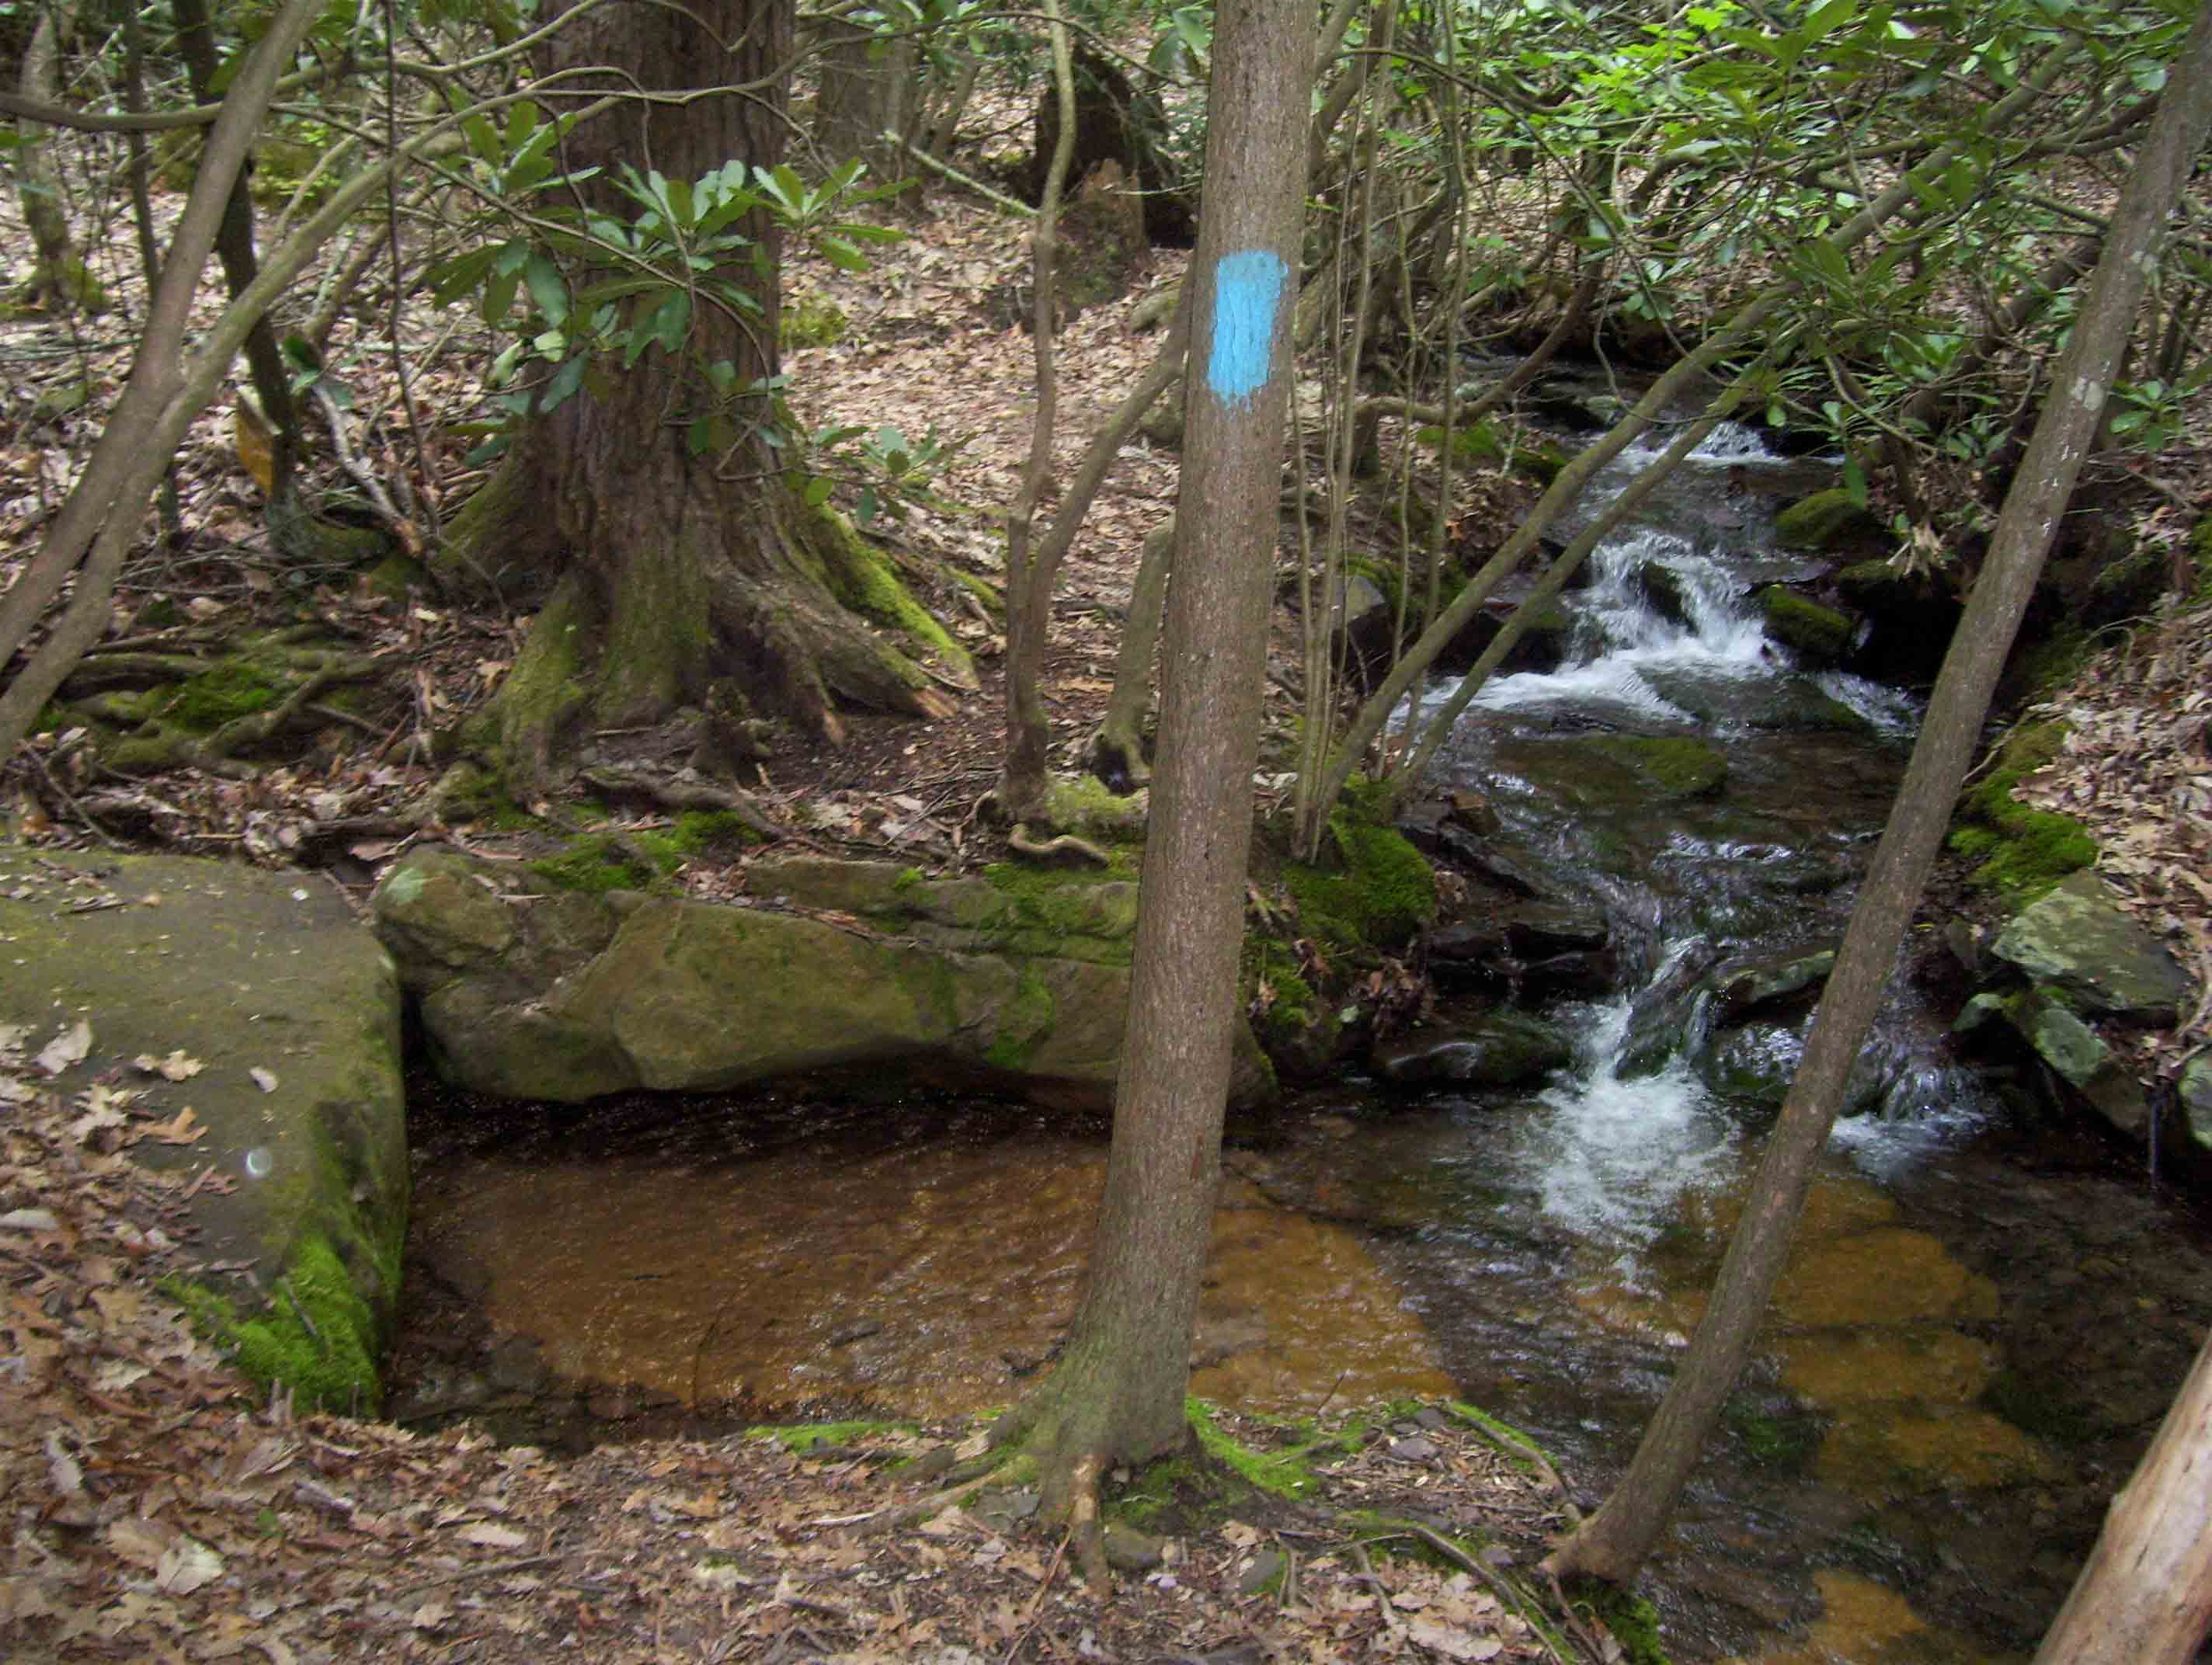 MM 2.3 Main prong of Laurel Creek in a grove of rhododendrons. This serves as water source for nearby Laurel Creek Shelter. Note the natural "bathtub" behind the tree with the blue blaze.  Courtesy dlcul@conncoll.edu